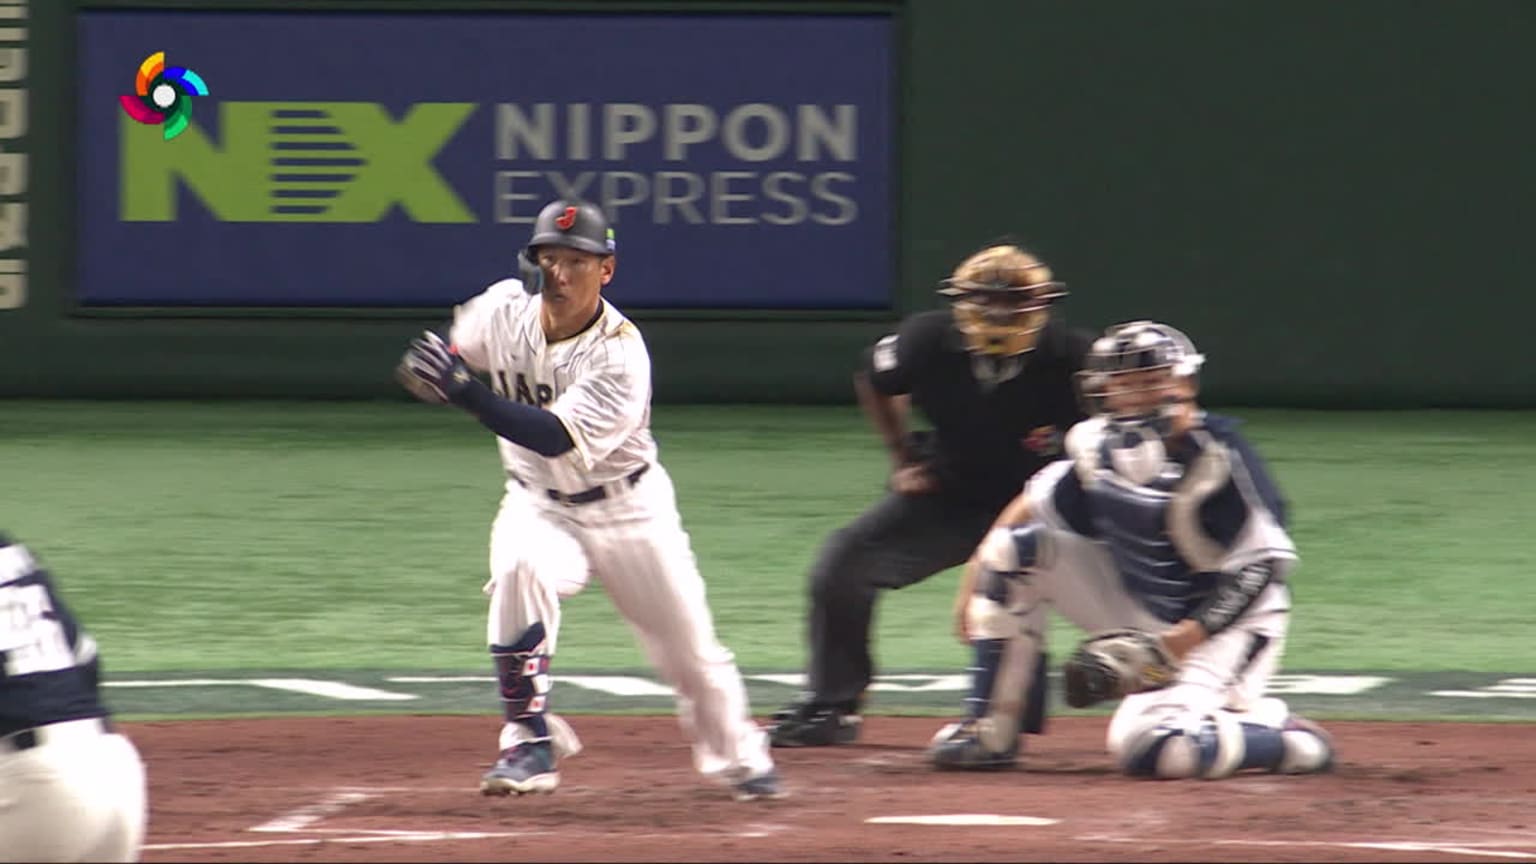 Masataka Yoshida continues to CRUSH! He has another great month